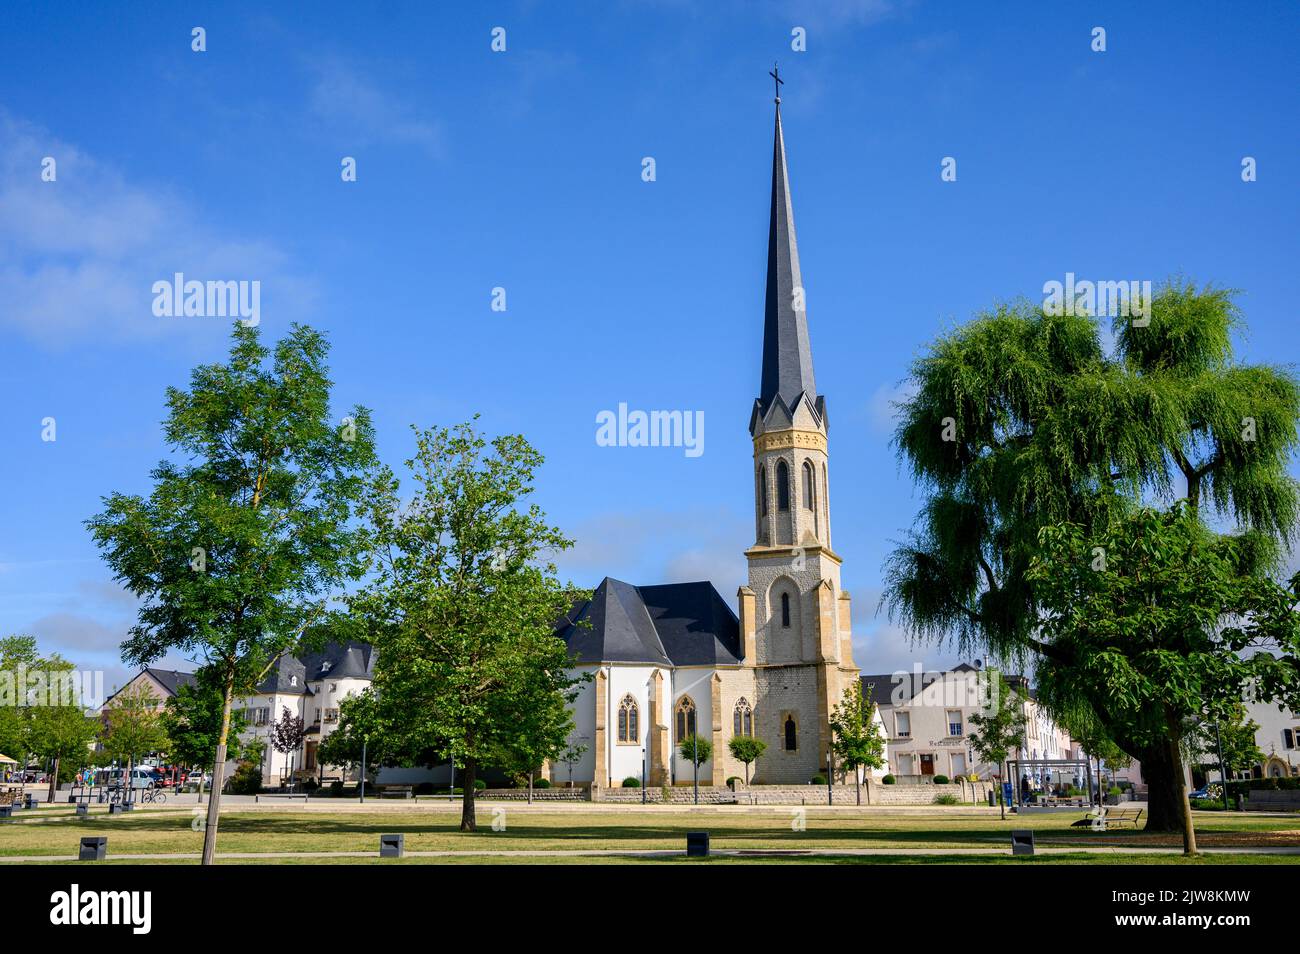 The Saints Peter and Paul church (Eglise Saints-Pierre-et-Paul) in Bertrange (also Bartreng or Bartringen), Luxembourg. Stock Photo